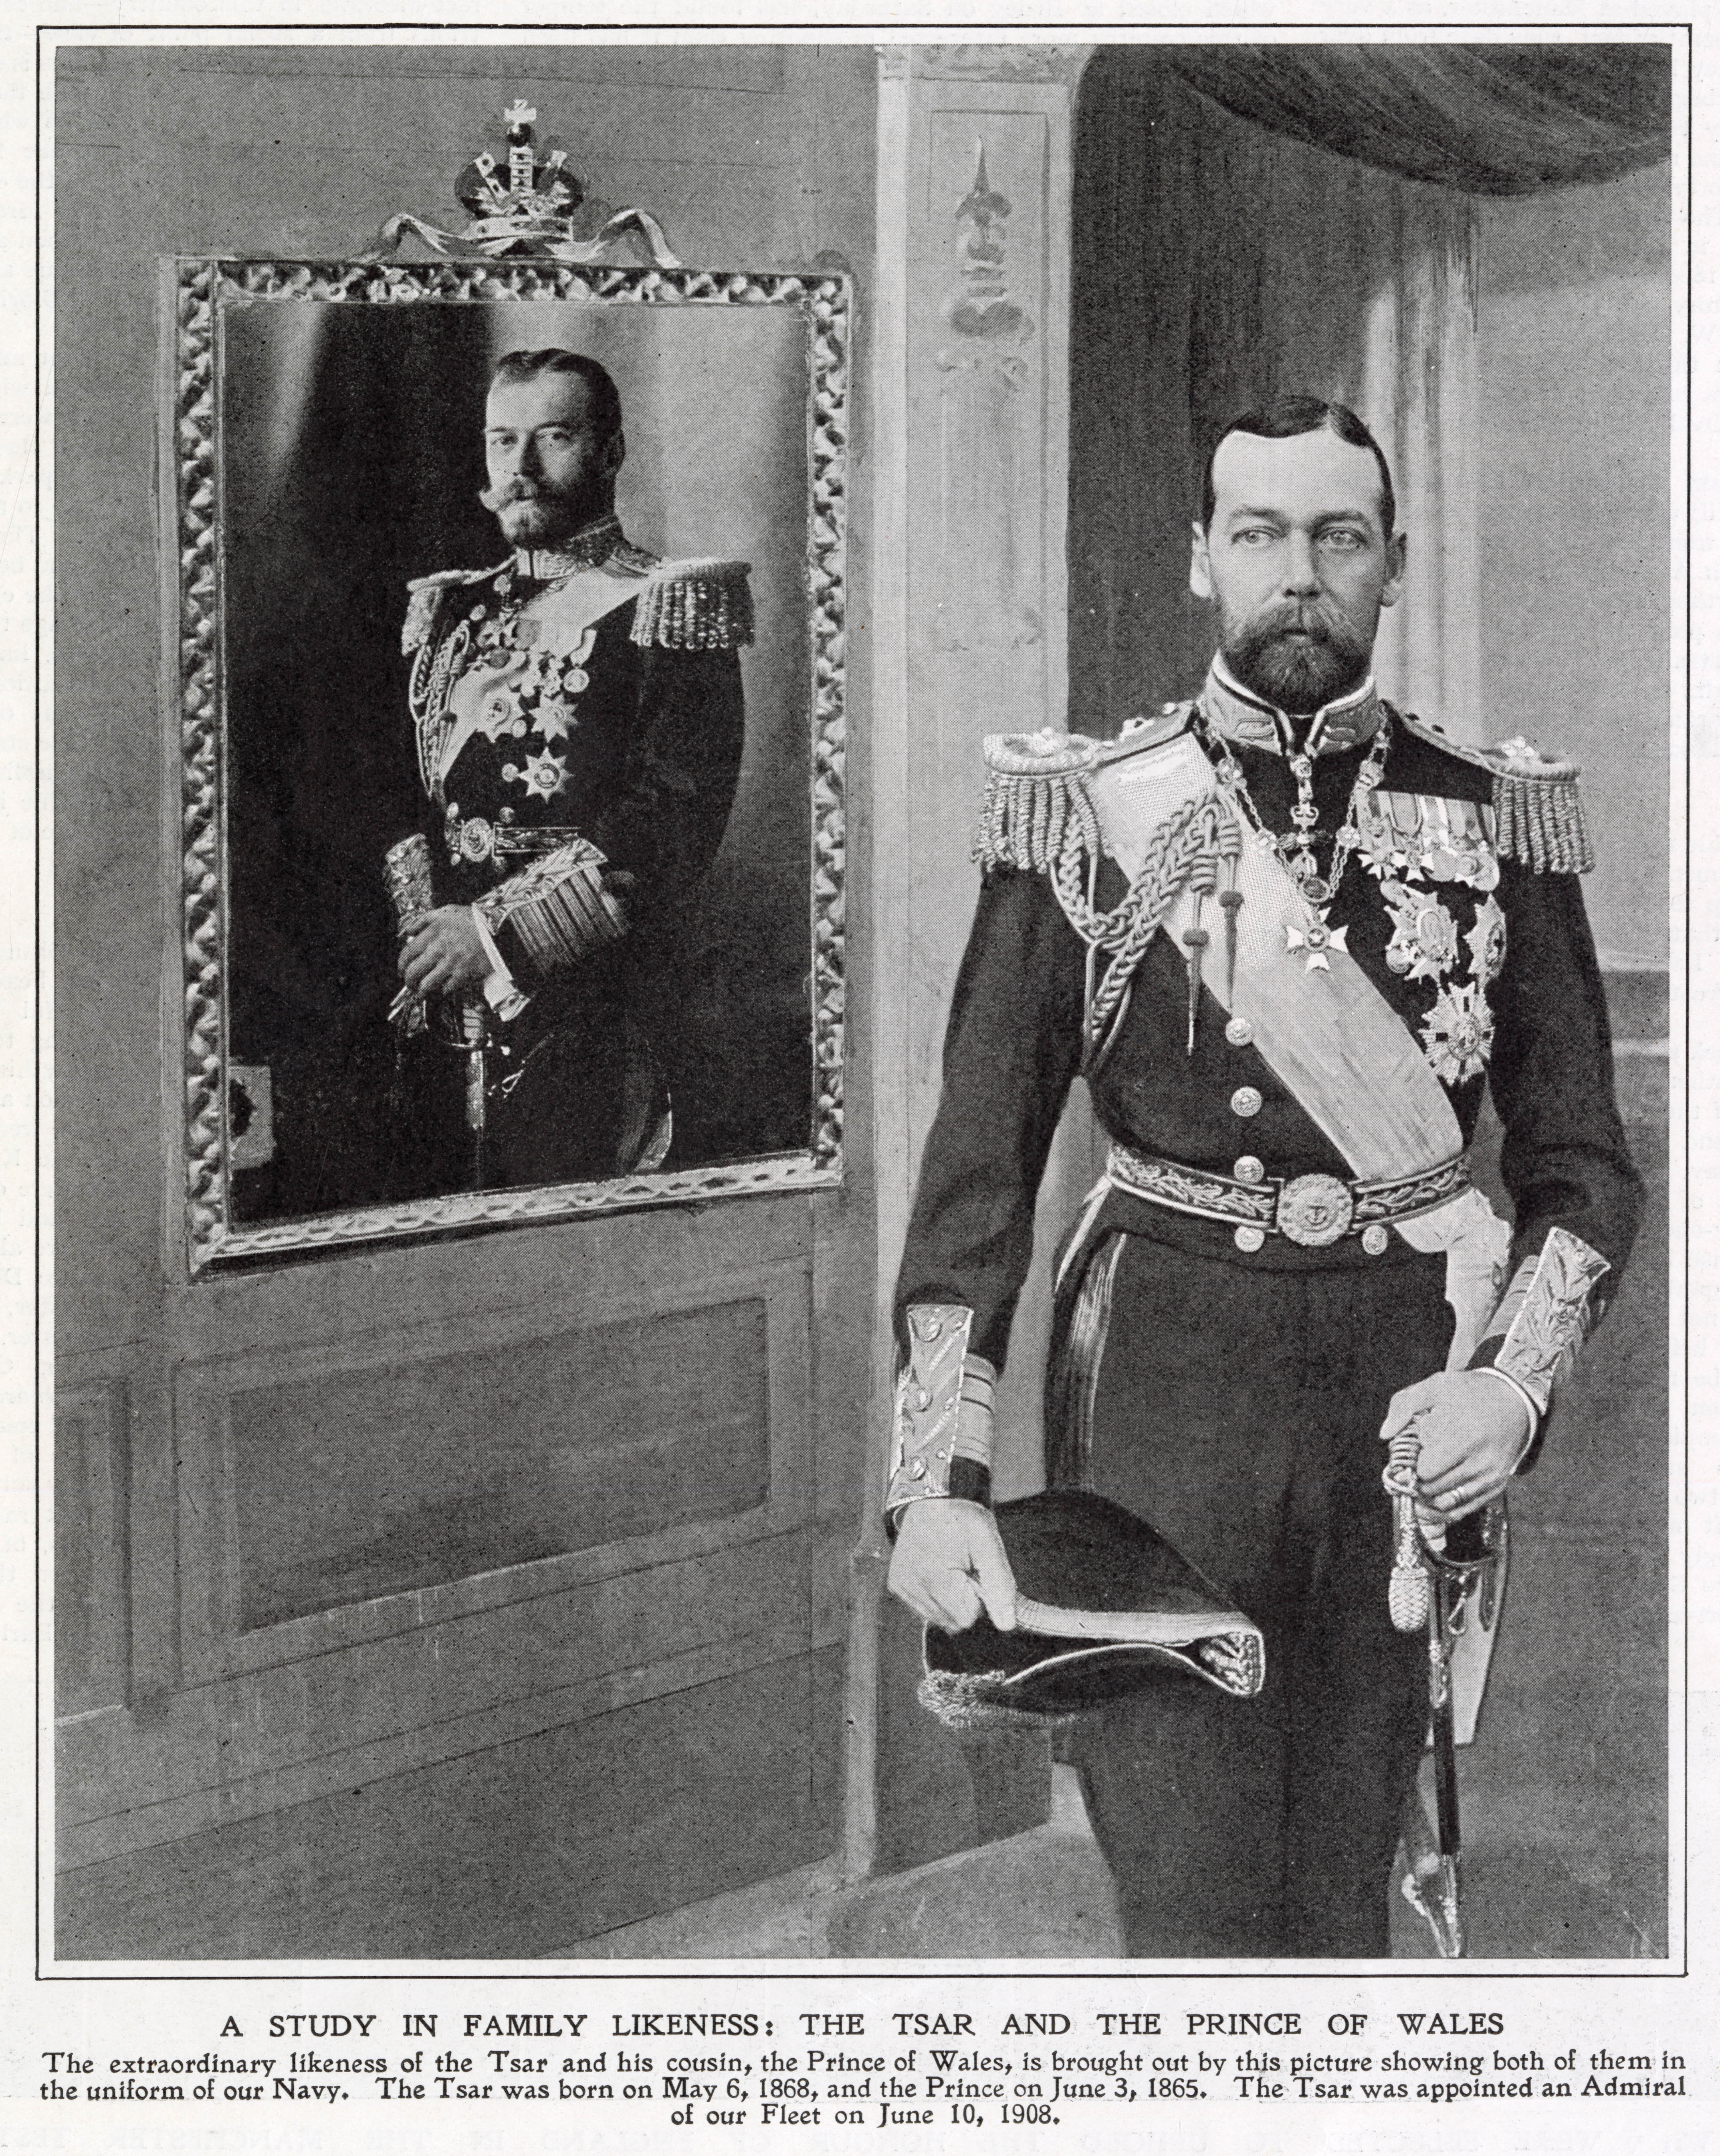 King George V (1865 - 1936), when Prince of Wales, standing beside a portrait of Czar Nicholas II of Russia (1894 - 1917) in 1909